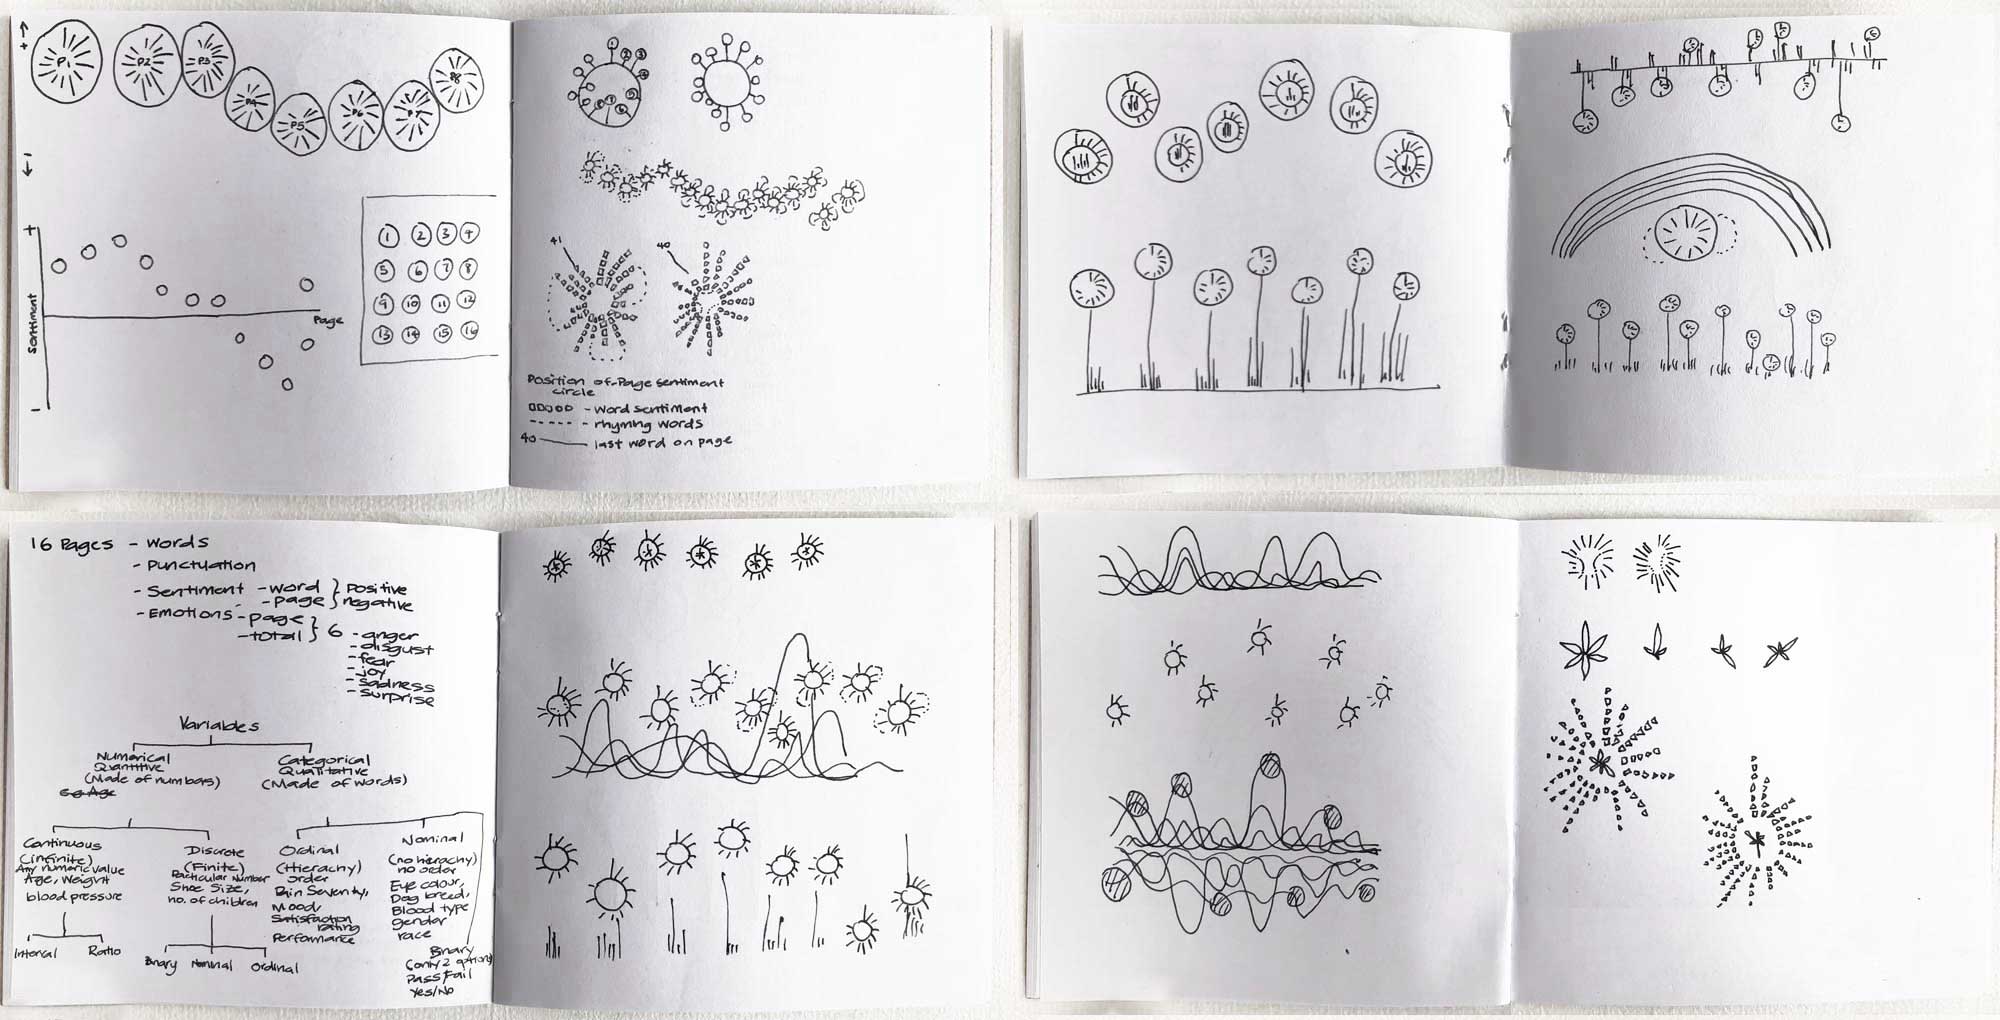 photograph of the same sketchbook opened up to 4 pages with black fountain pen line drawings of circles, sunburst patterns and scribblednotes